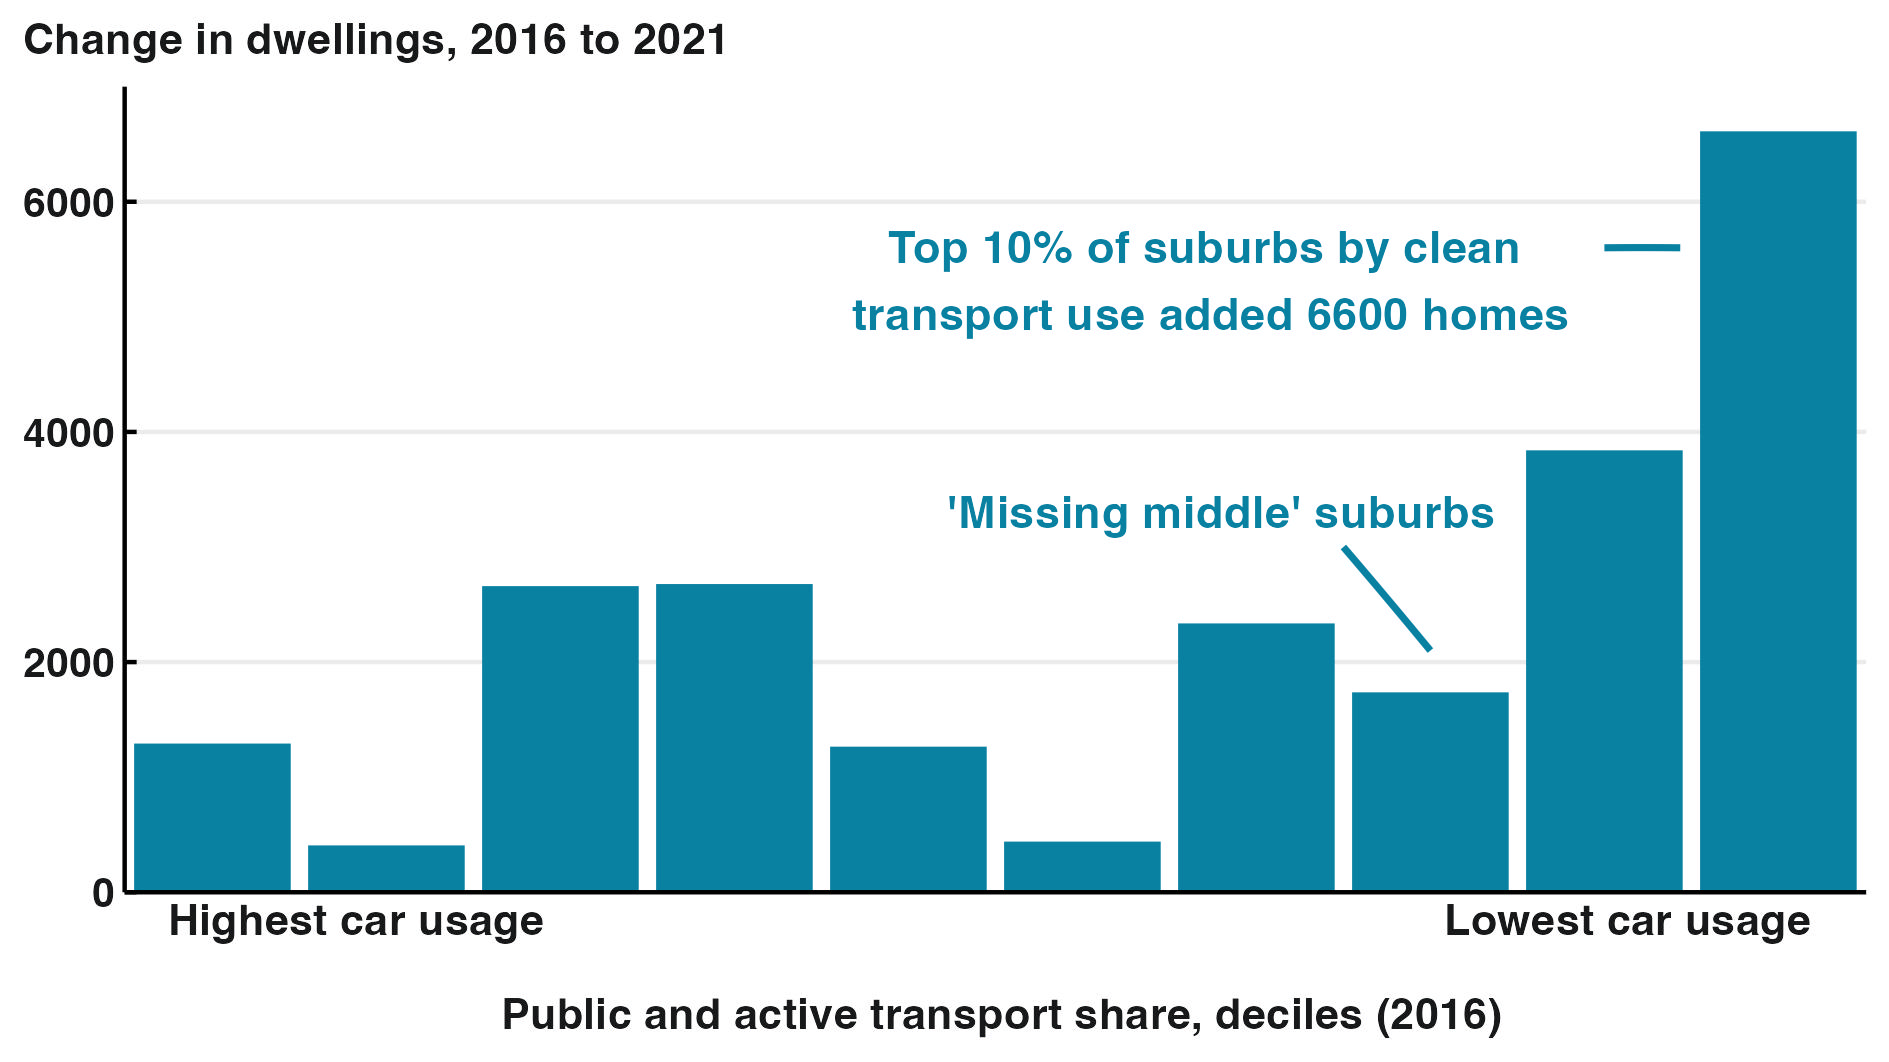 Chart showing distribution of homes built between 2016 and 2021 across deciles of public and active transport use.